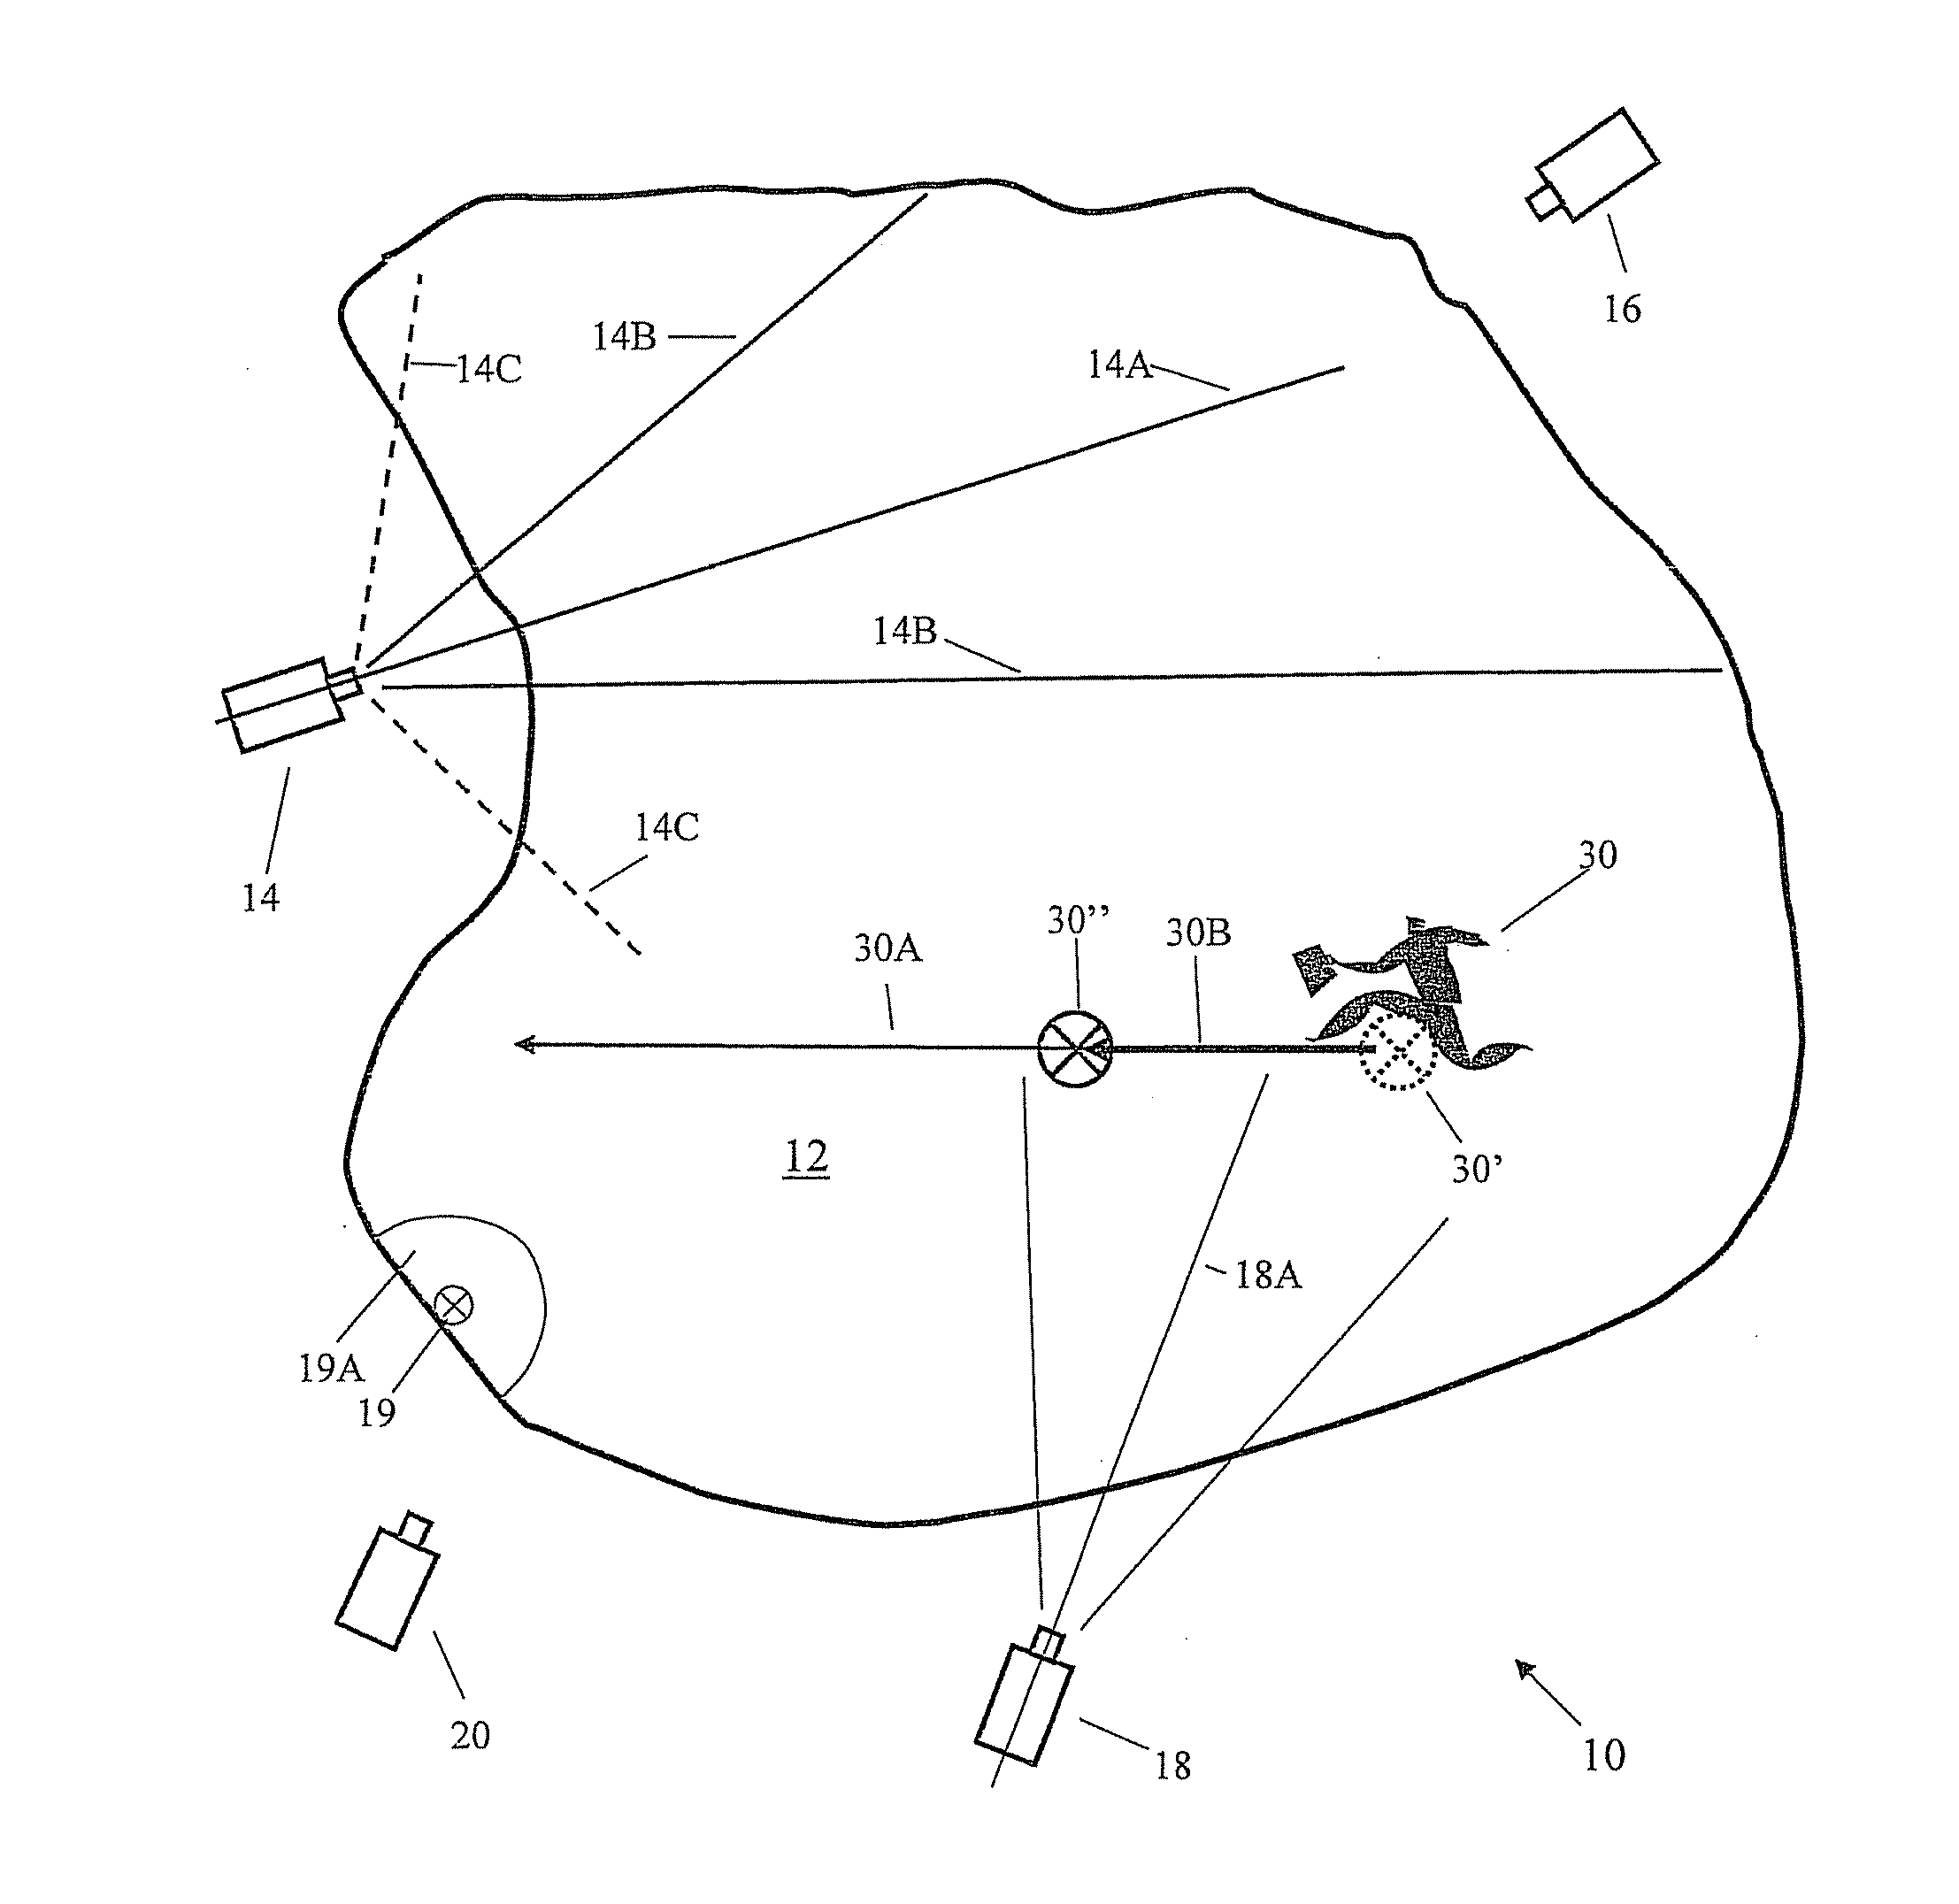 Continuous geospatial tracking system and method